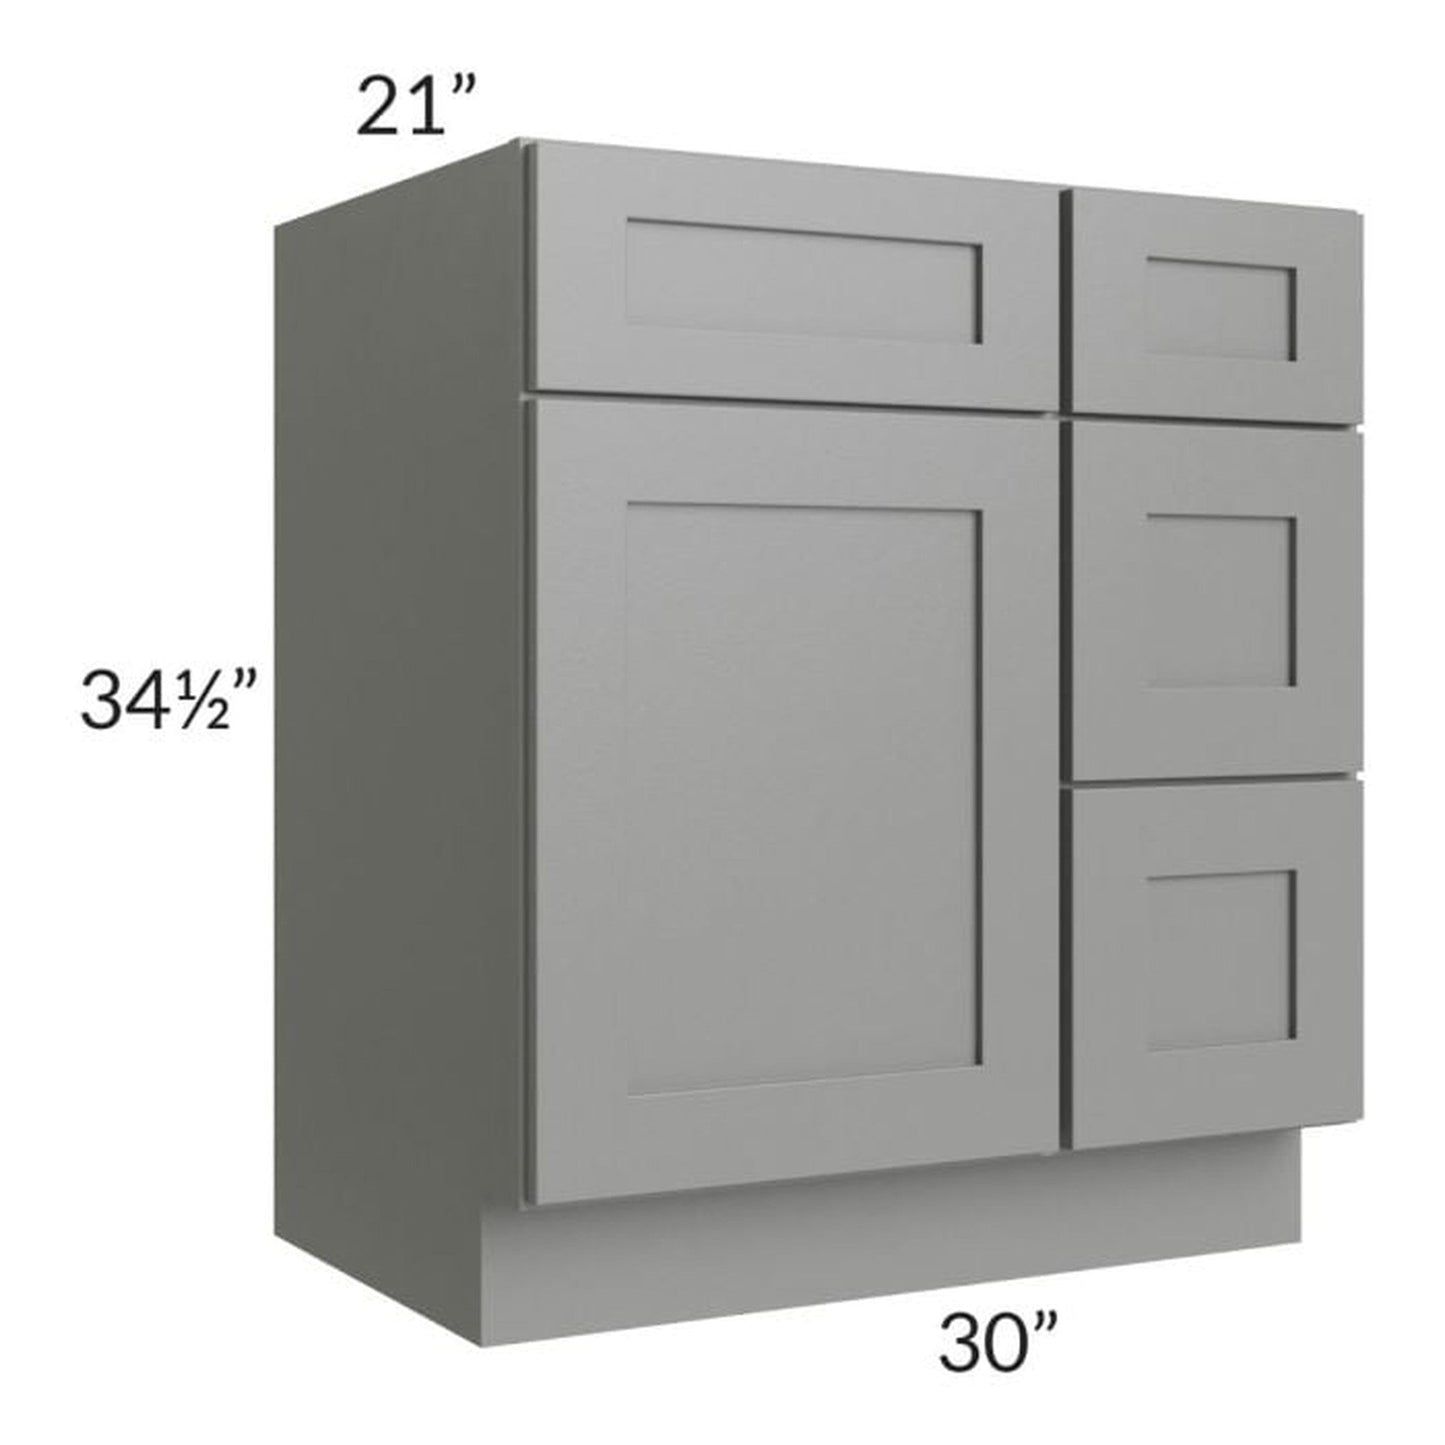 RTA Shale Grey Shaker 30" Vanity Sink Base Cabinet (Drawers on Right) with 2 Decorative End Panels